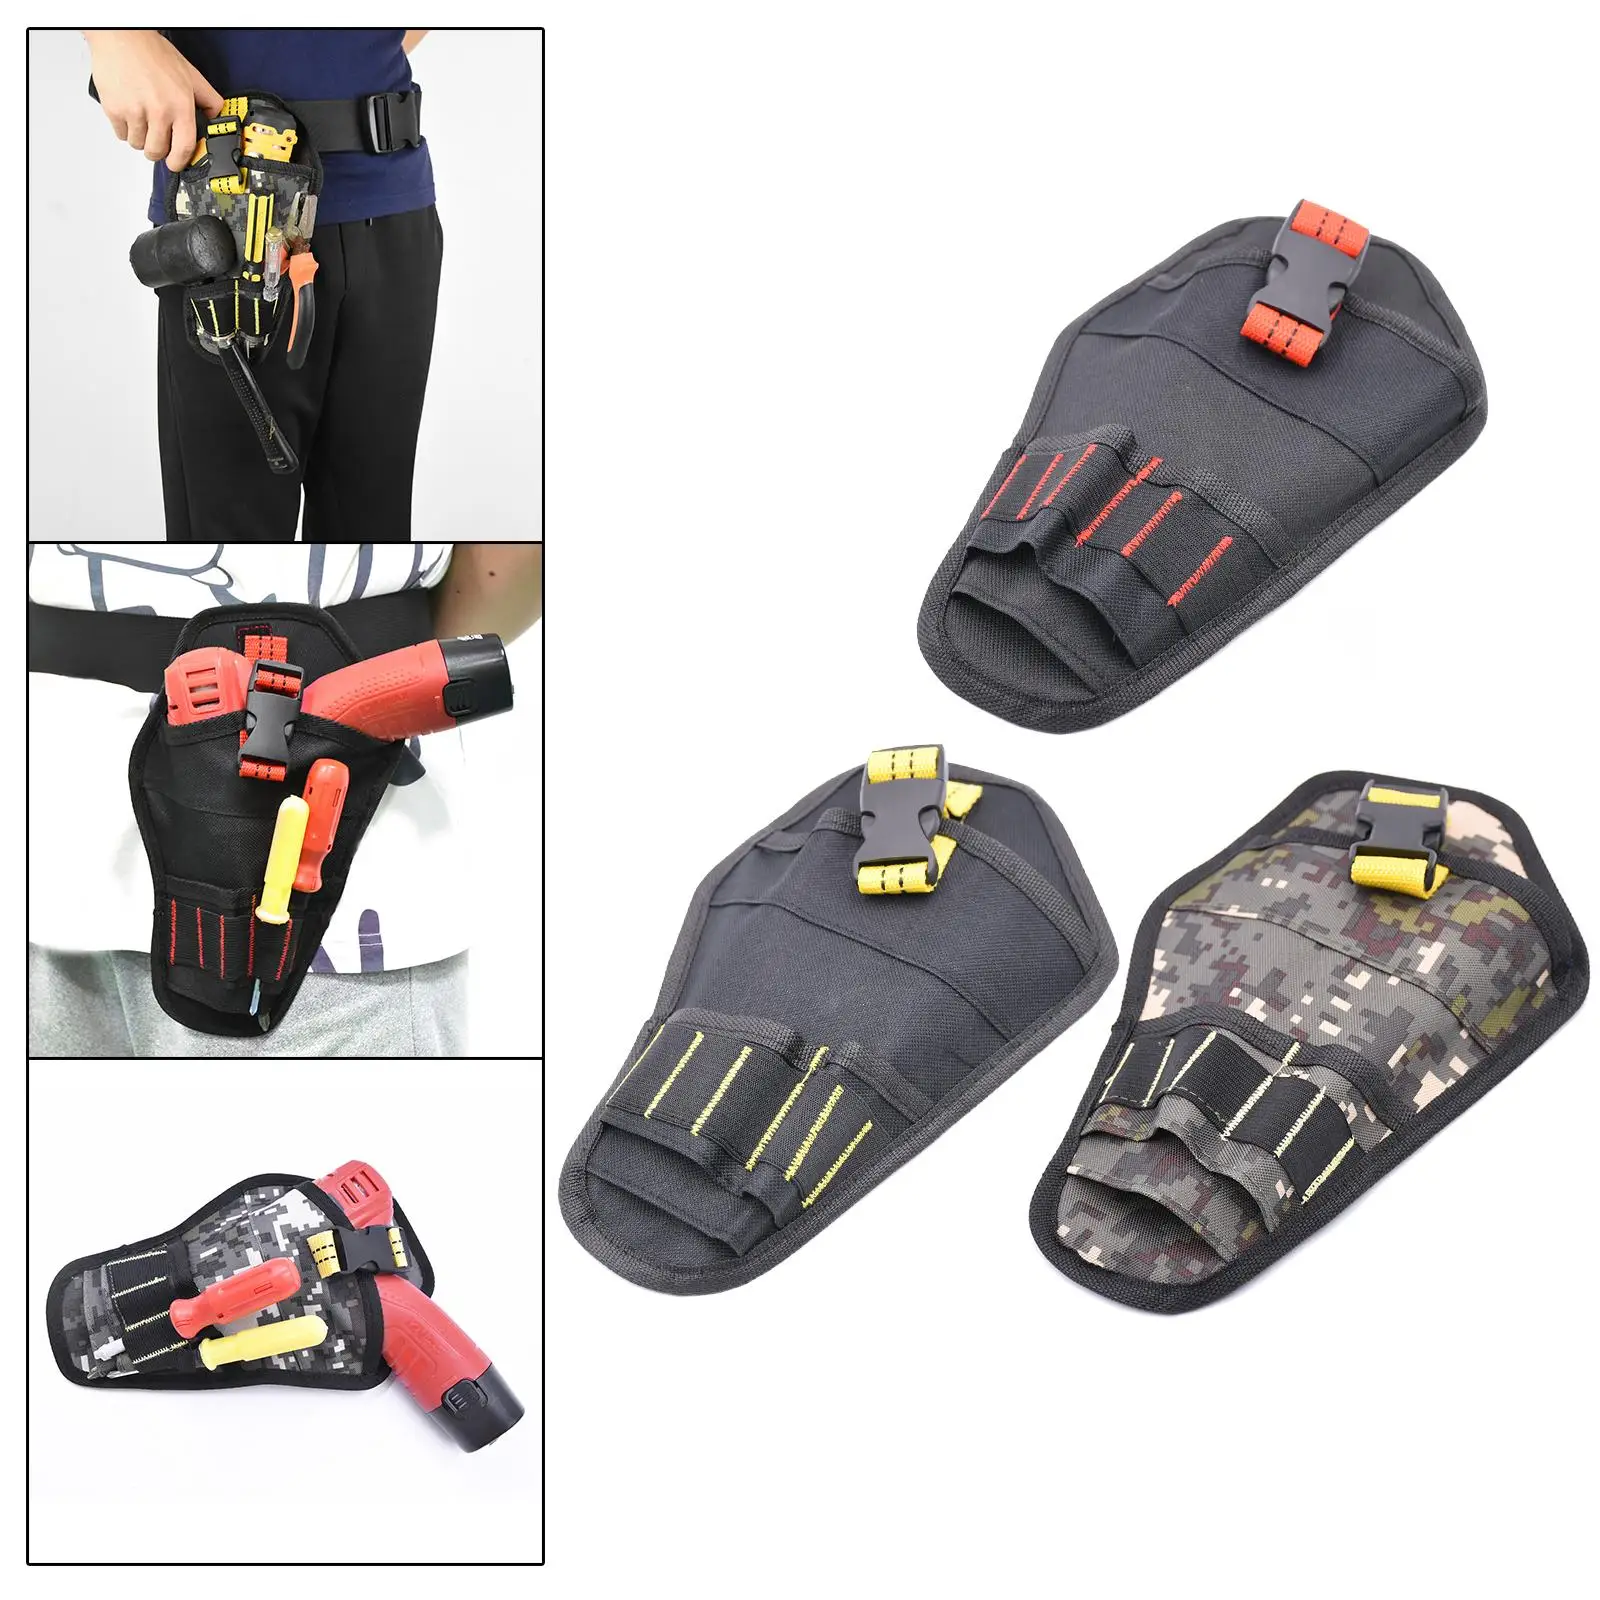 Electric Grinder Bag Convenient Electrician Hand Tool Bag Organizer for Worker Electricians Hand Tools Electric Drill